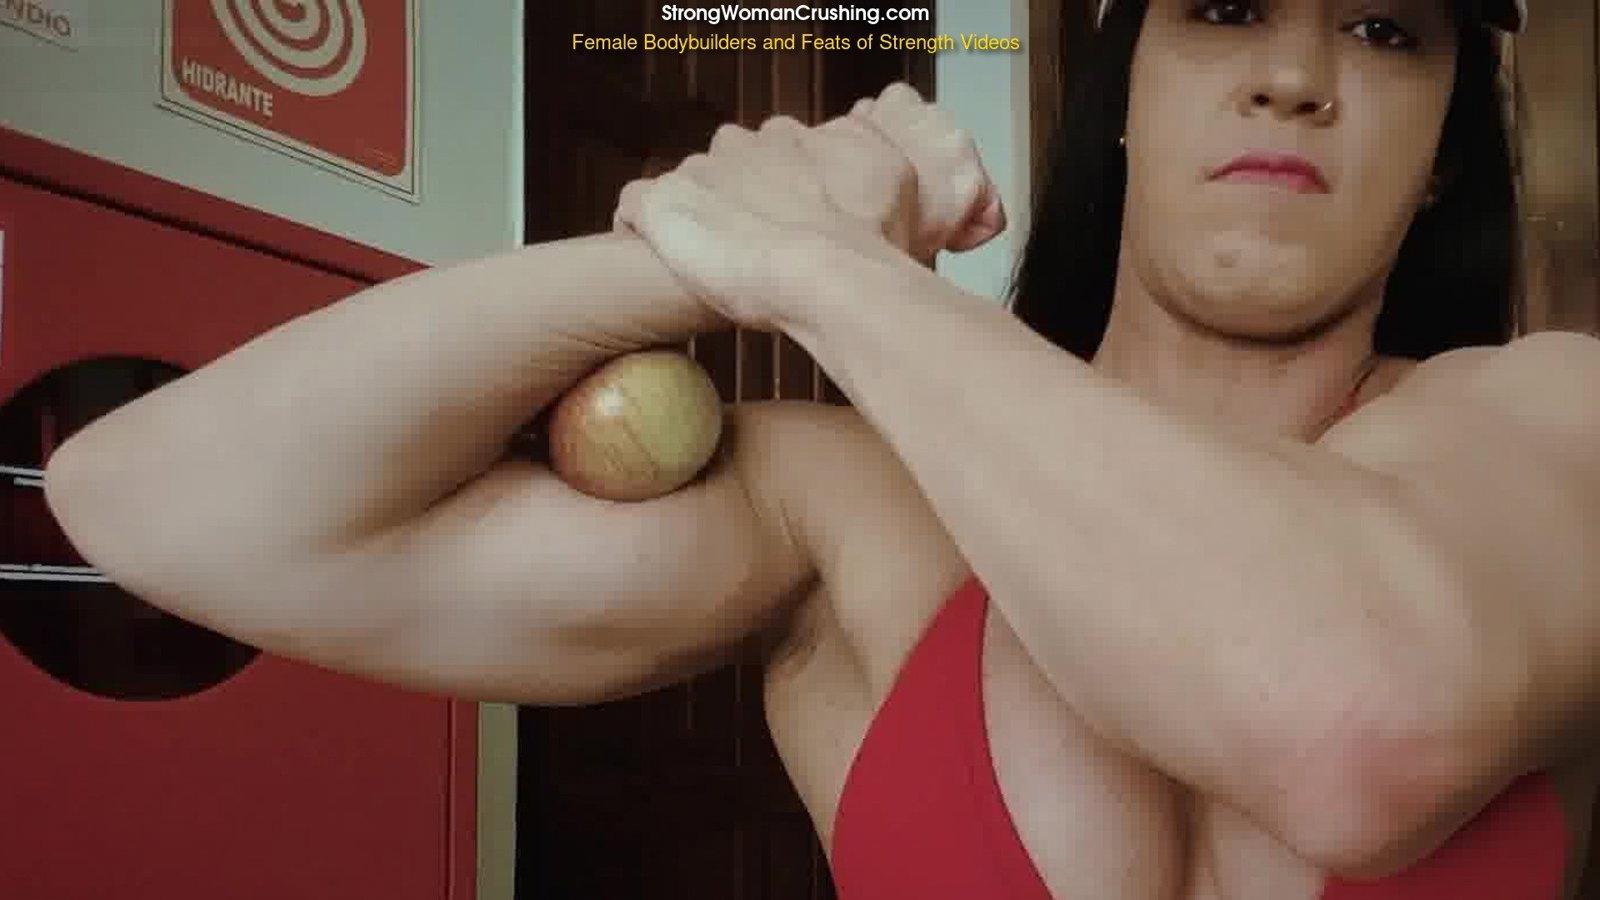 Photo by MusclegirlStrength with the username @MusclegirlStrength, who is a brand user,  April 16, 2024 at 1:43 AM and the text says 'Muscle Queen Nana Olyver Crushes Apples with Super Strength!: StrongWomanCrushing.com

#musclegirl #musclegirllove #femalemuscle #femalemuscles #featsofstrength #MuscleMavens #StrengthIsSexy #PowerfulWomen'